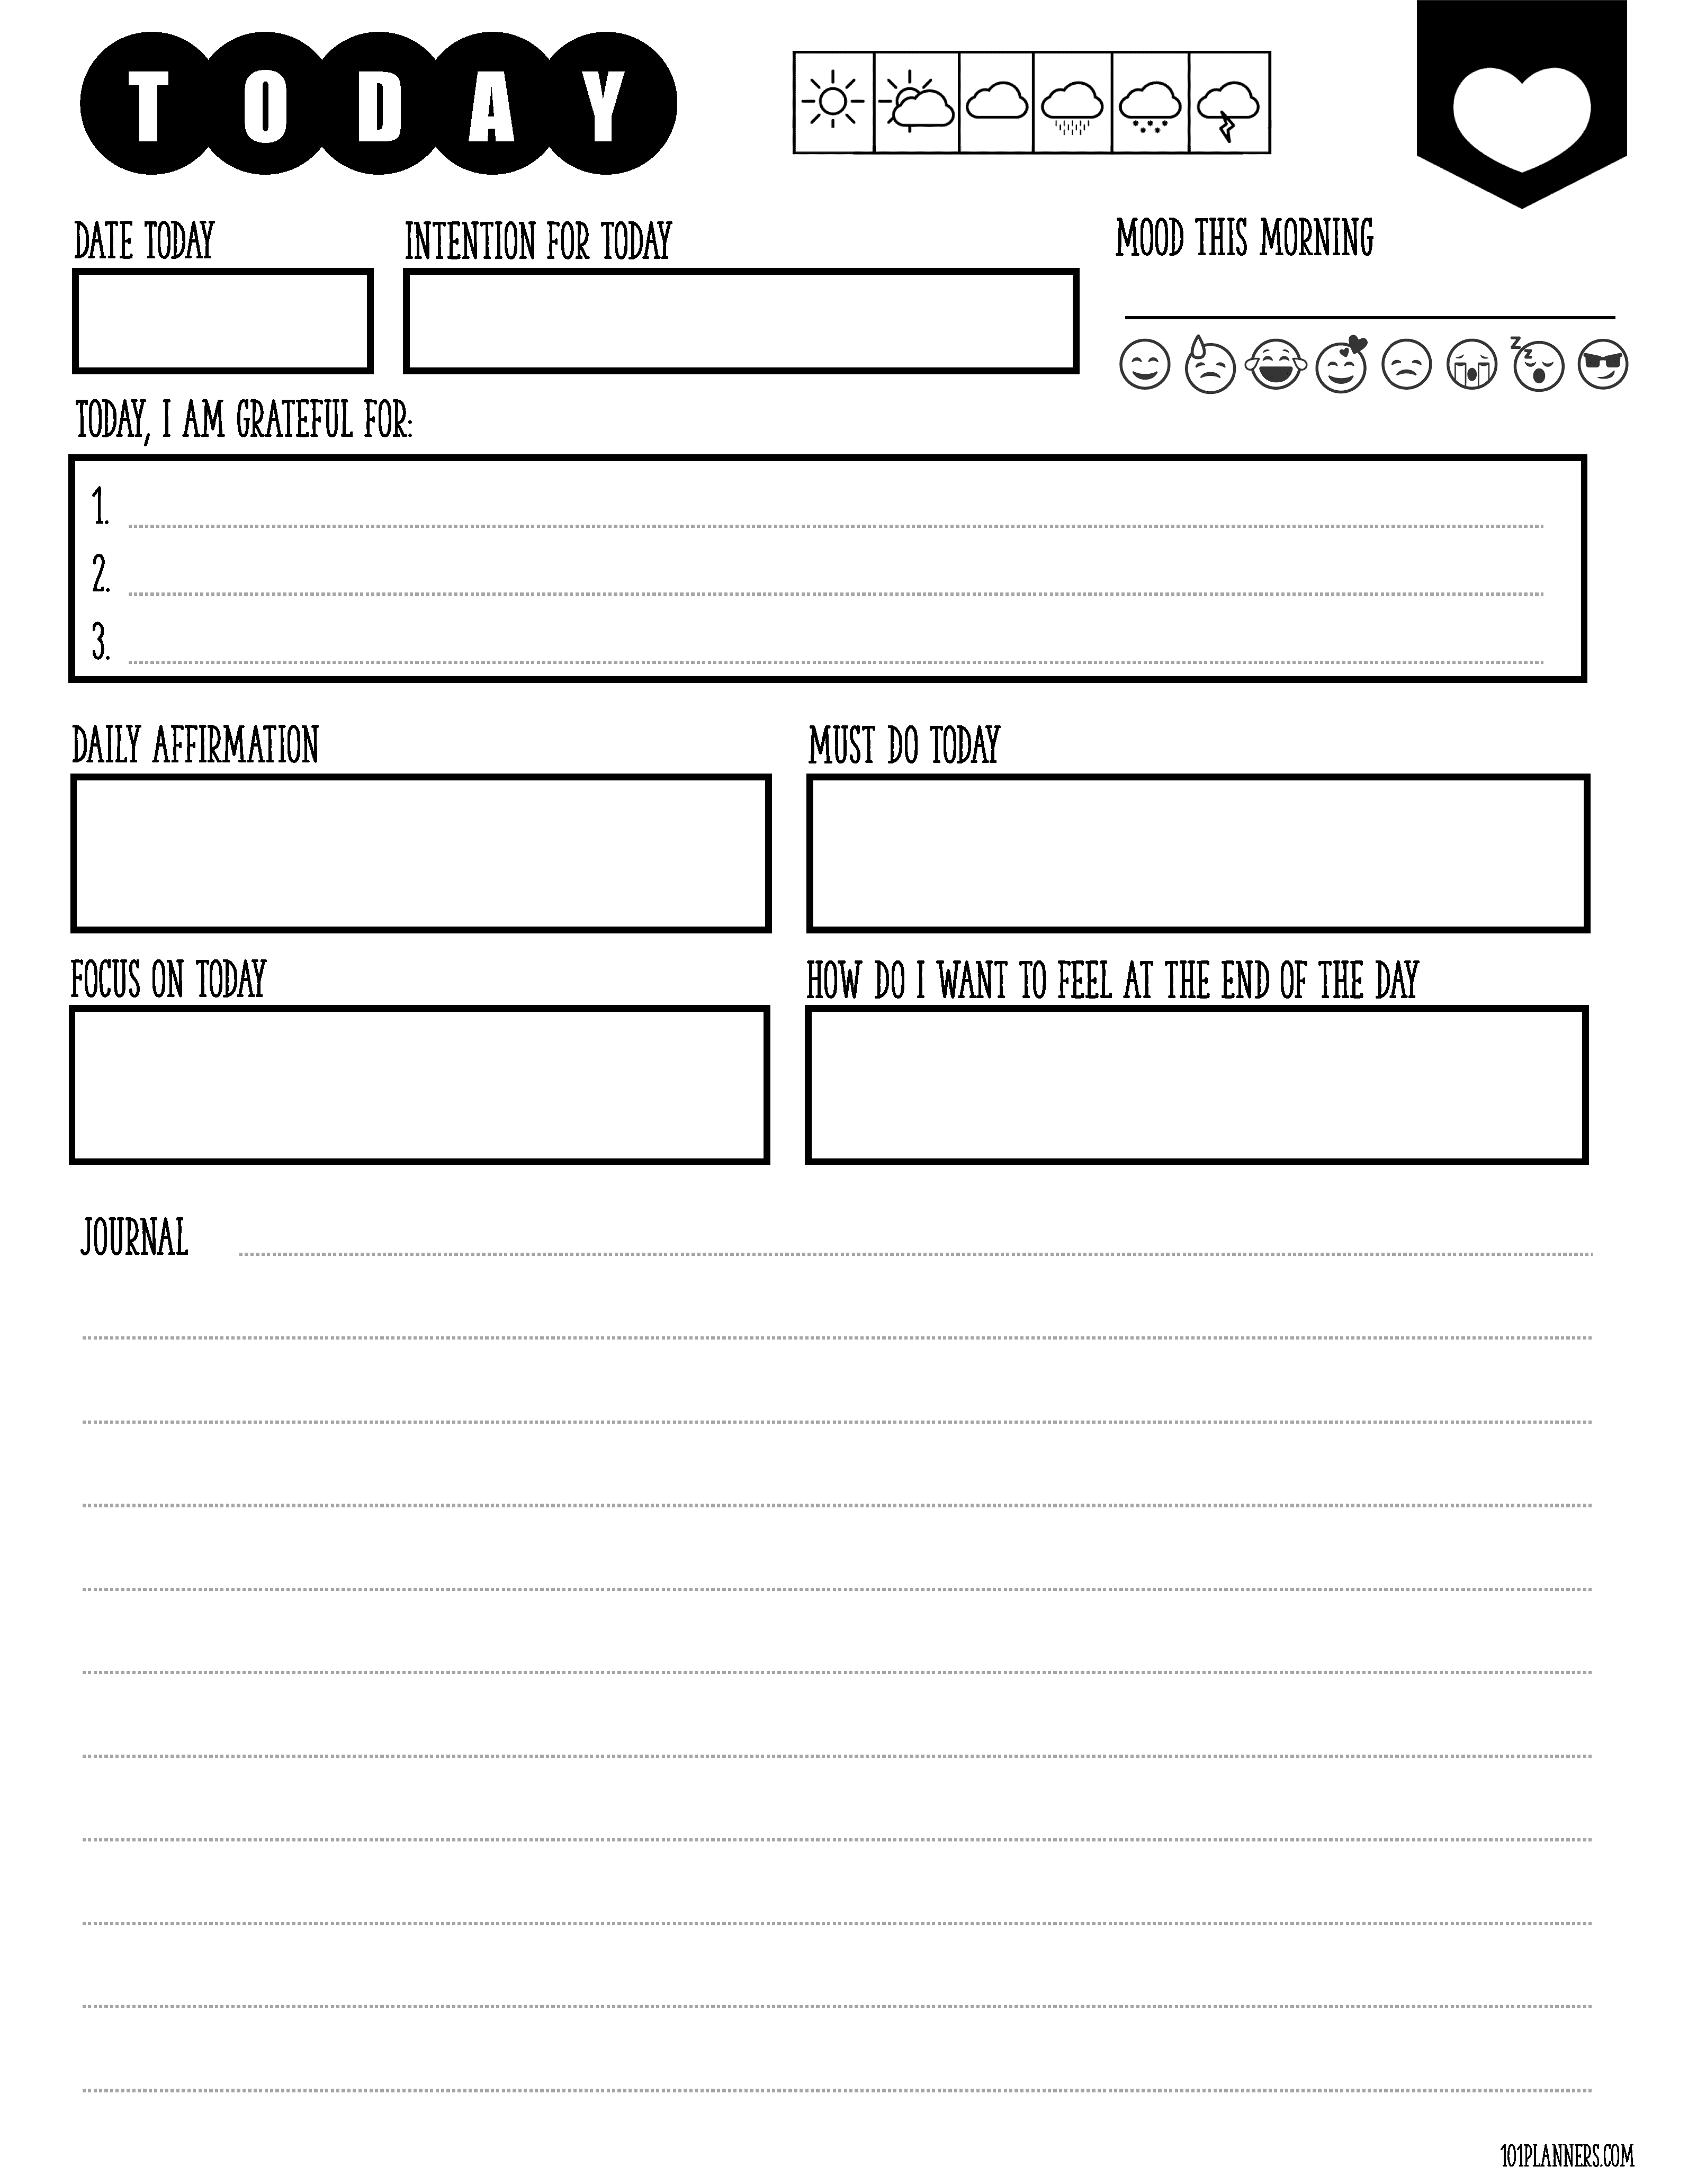 Time-Tested Daily Journal Template (Download) - Journaling Habit